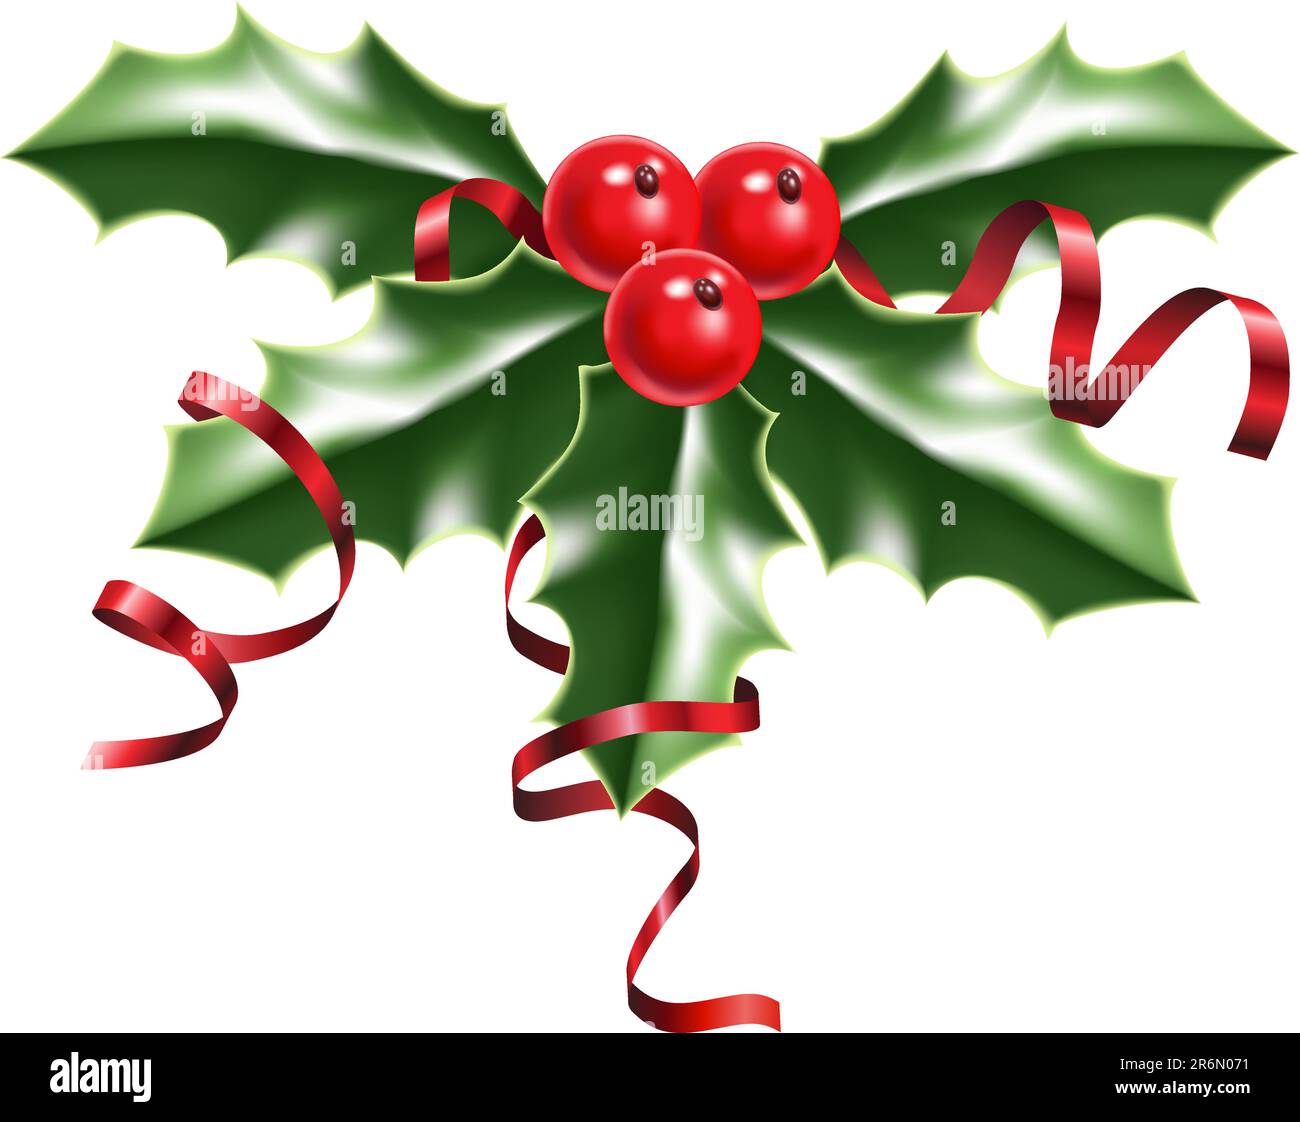 illustration of a sprig of holly with red berries and red ribbons Stock Vector